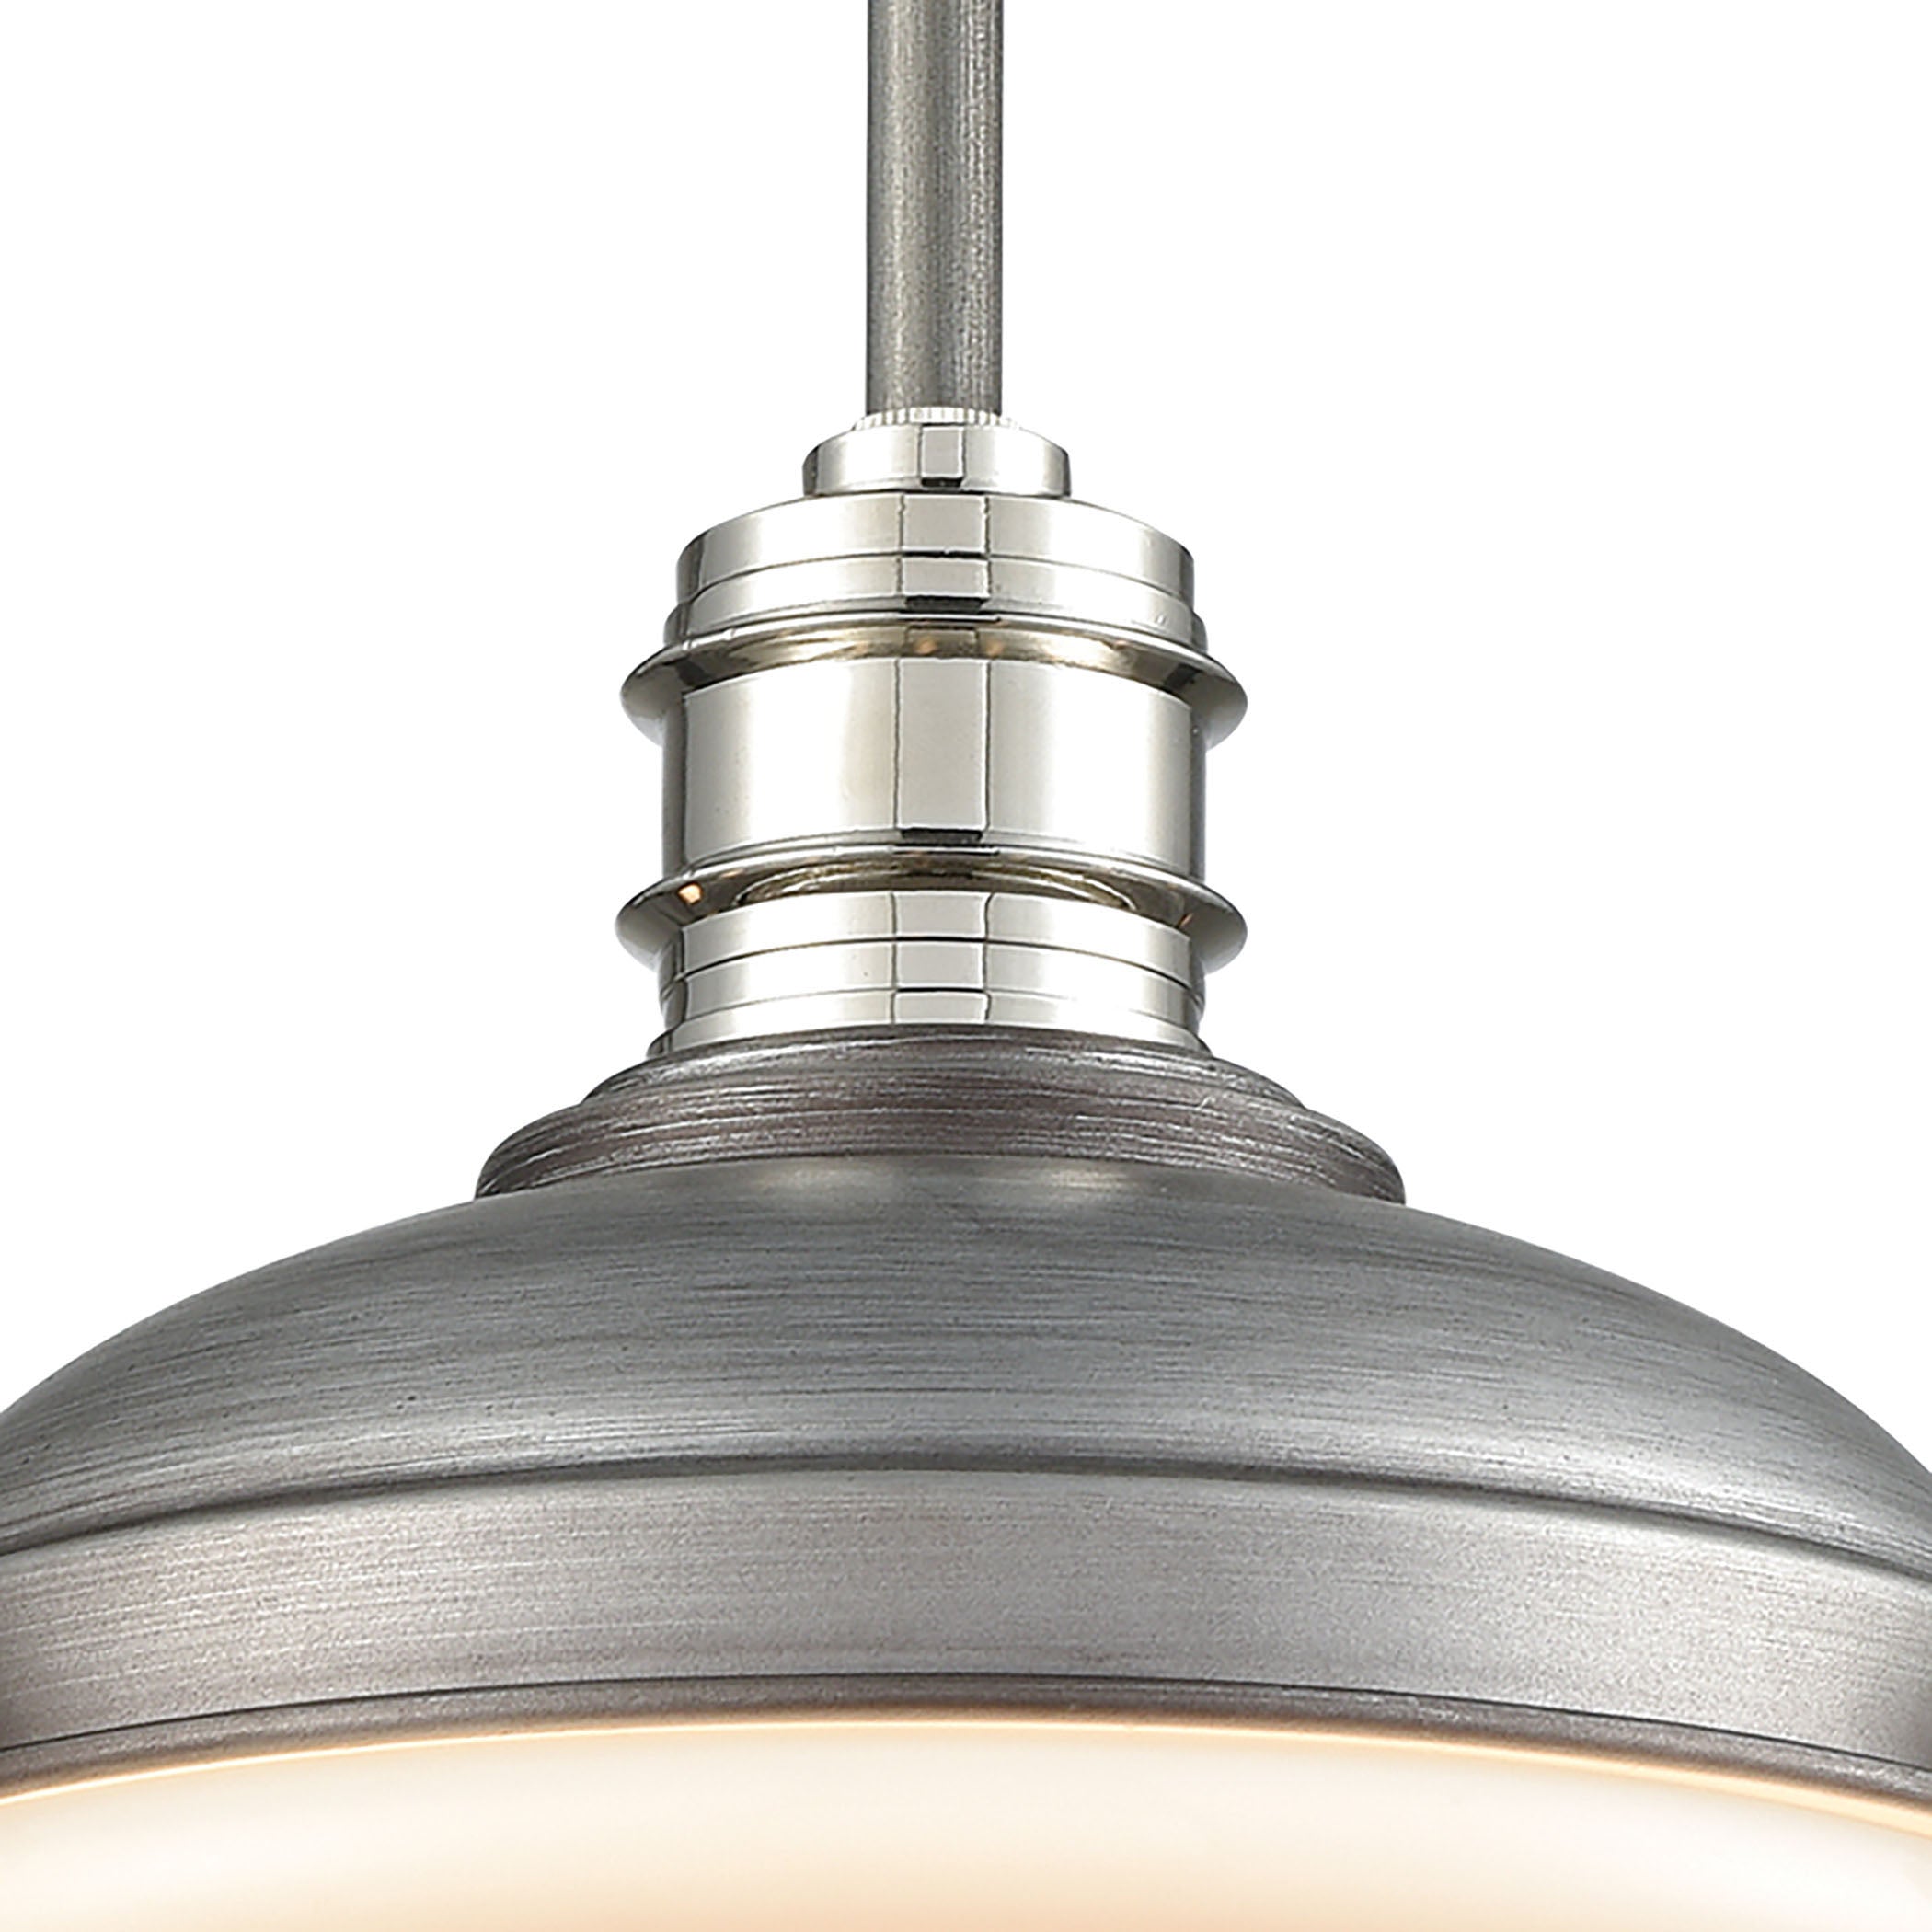 ELK Lighting 16106/1 Riley 1-Light Mini Pendant in Weathered Zinc and Polished Nickel with Opal White Glass